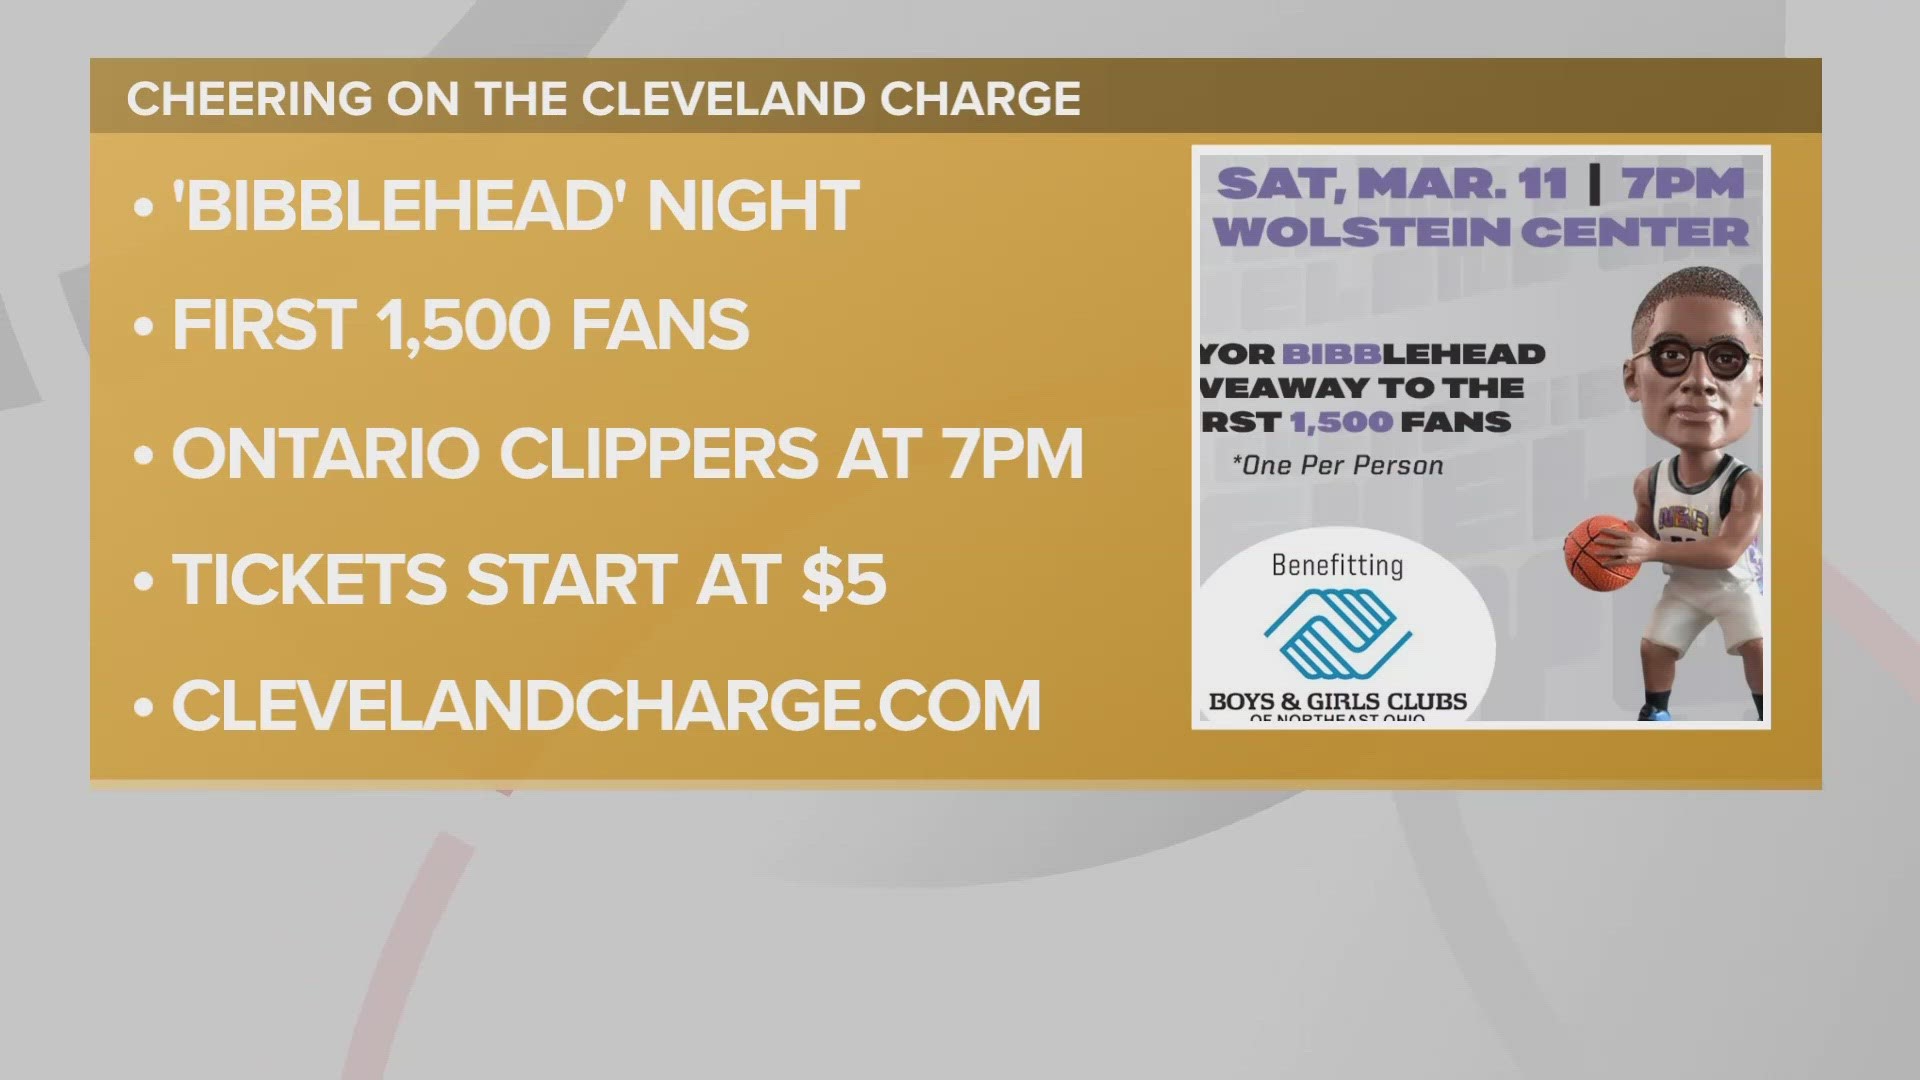 The first 1,500 fans will receive a bobblehead of Cleveland mayor, Justin Bibb.